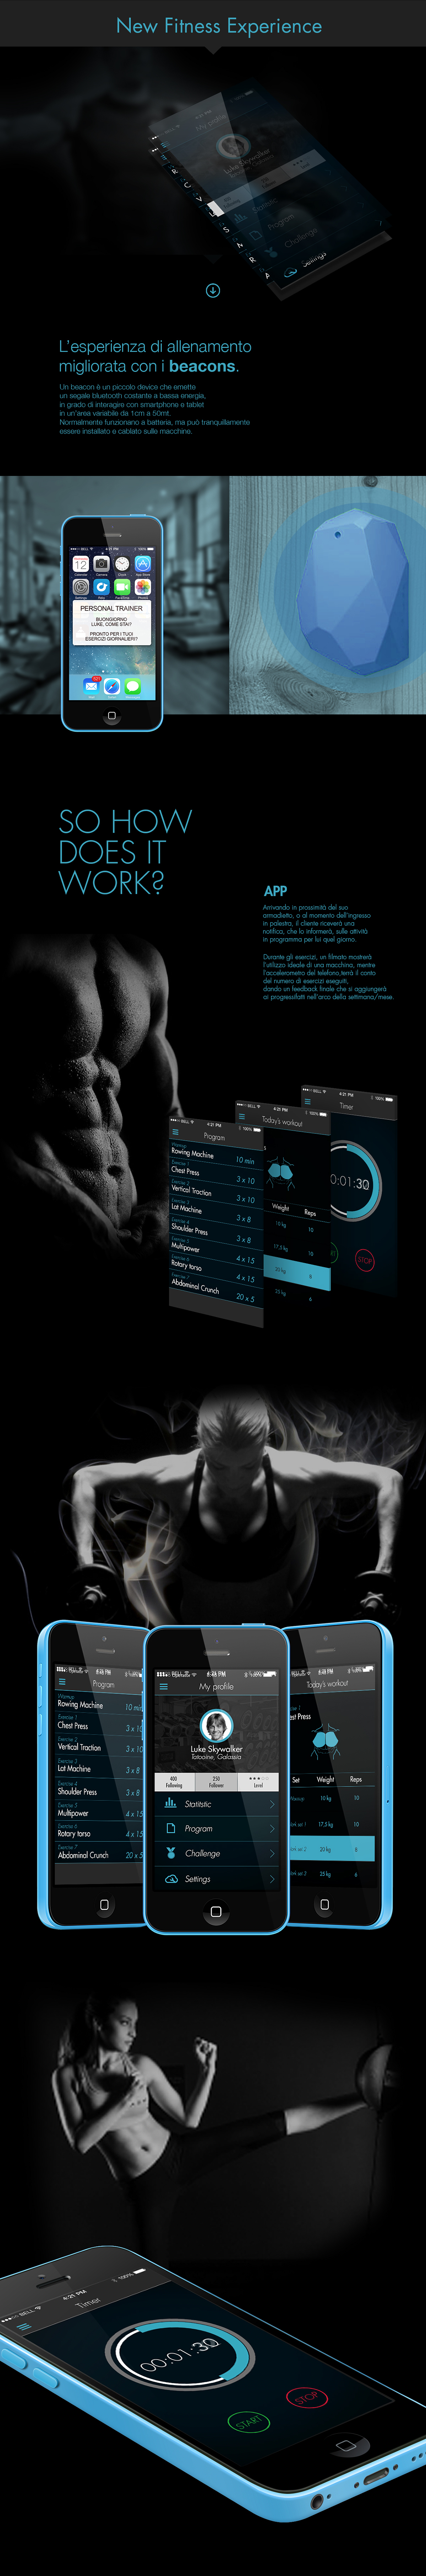 ios iBeacons fitness concept Interface UI ux app mobile interaction